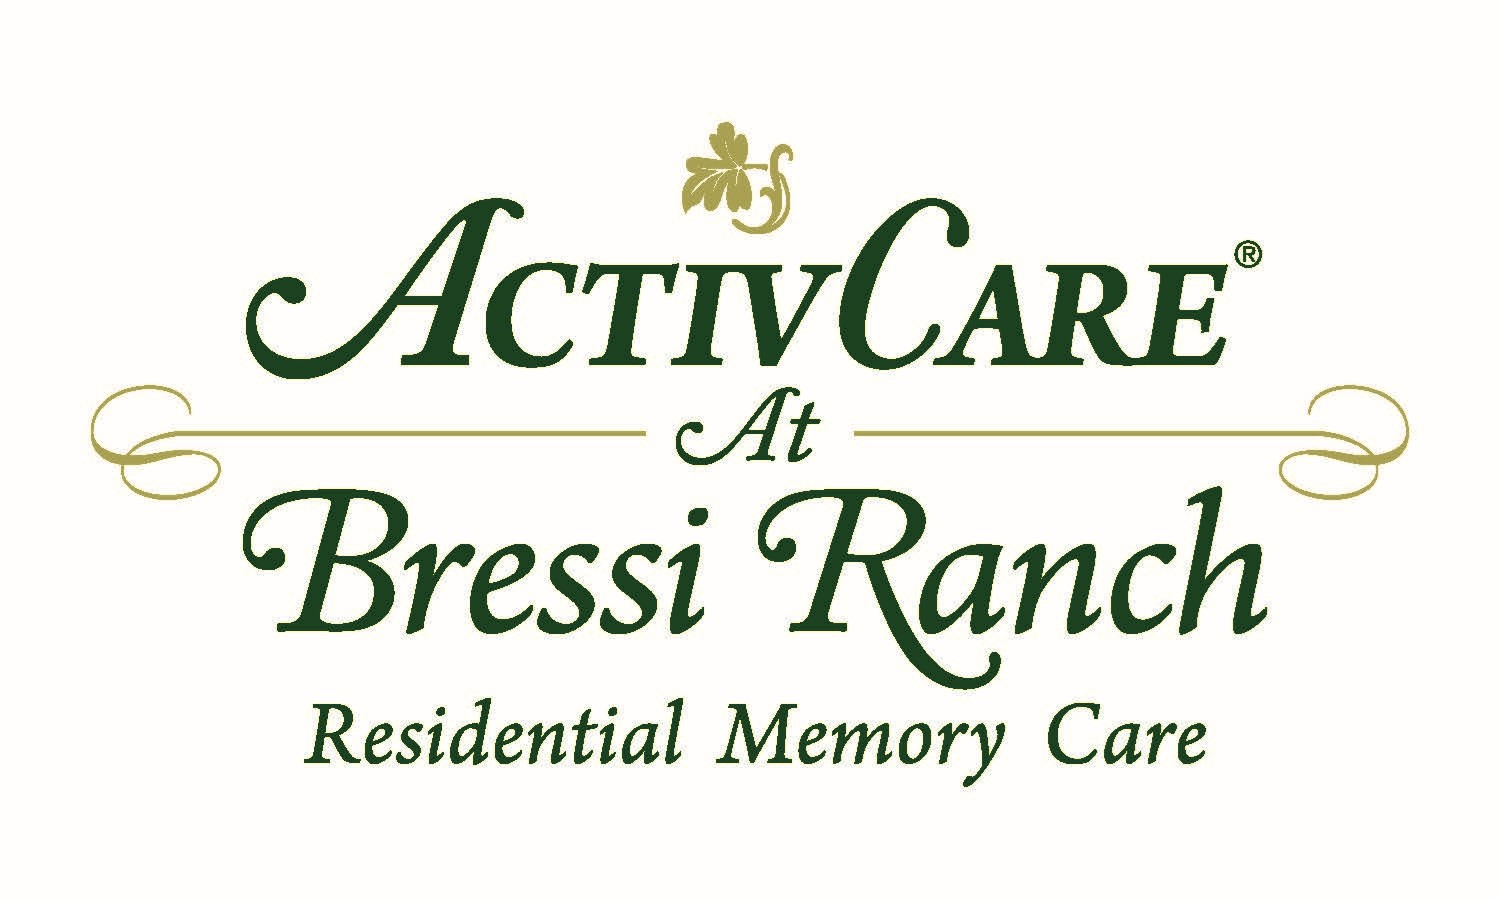 ActivCare at Bressi Ranch